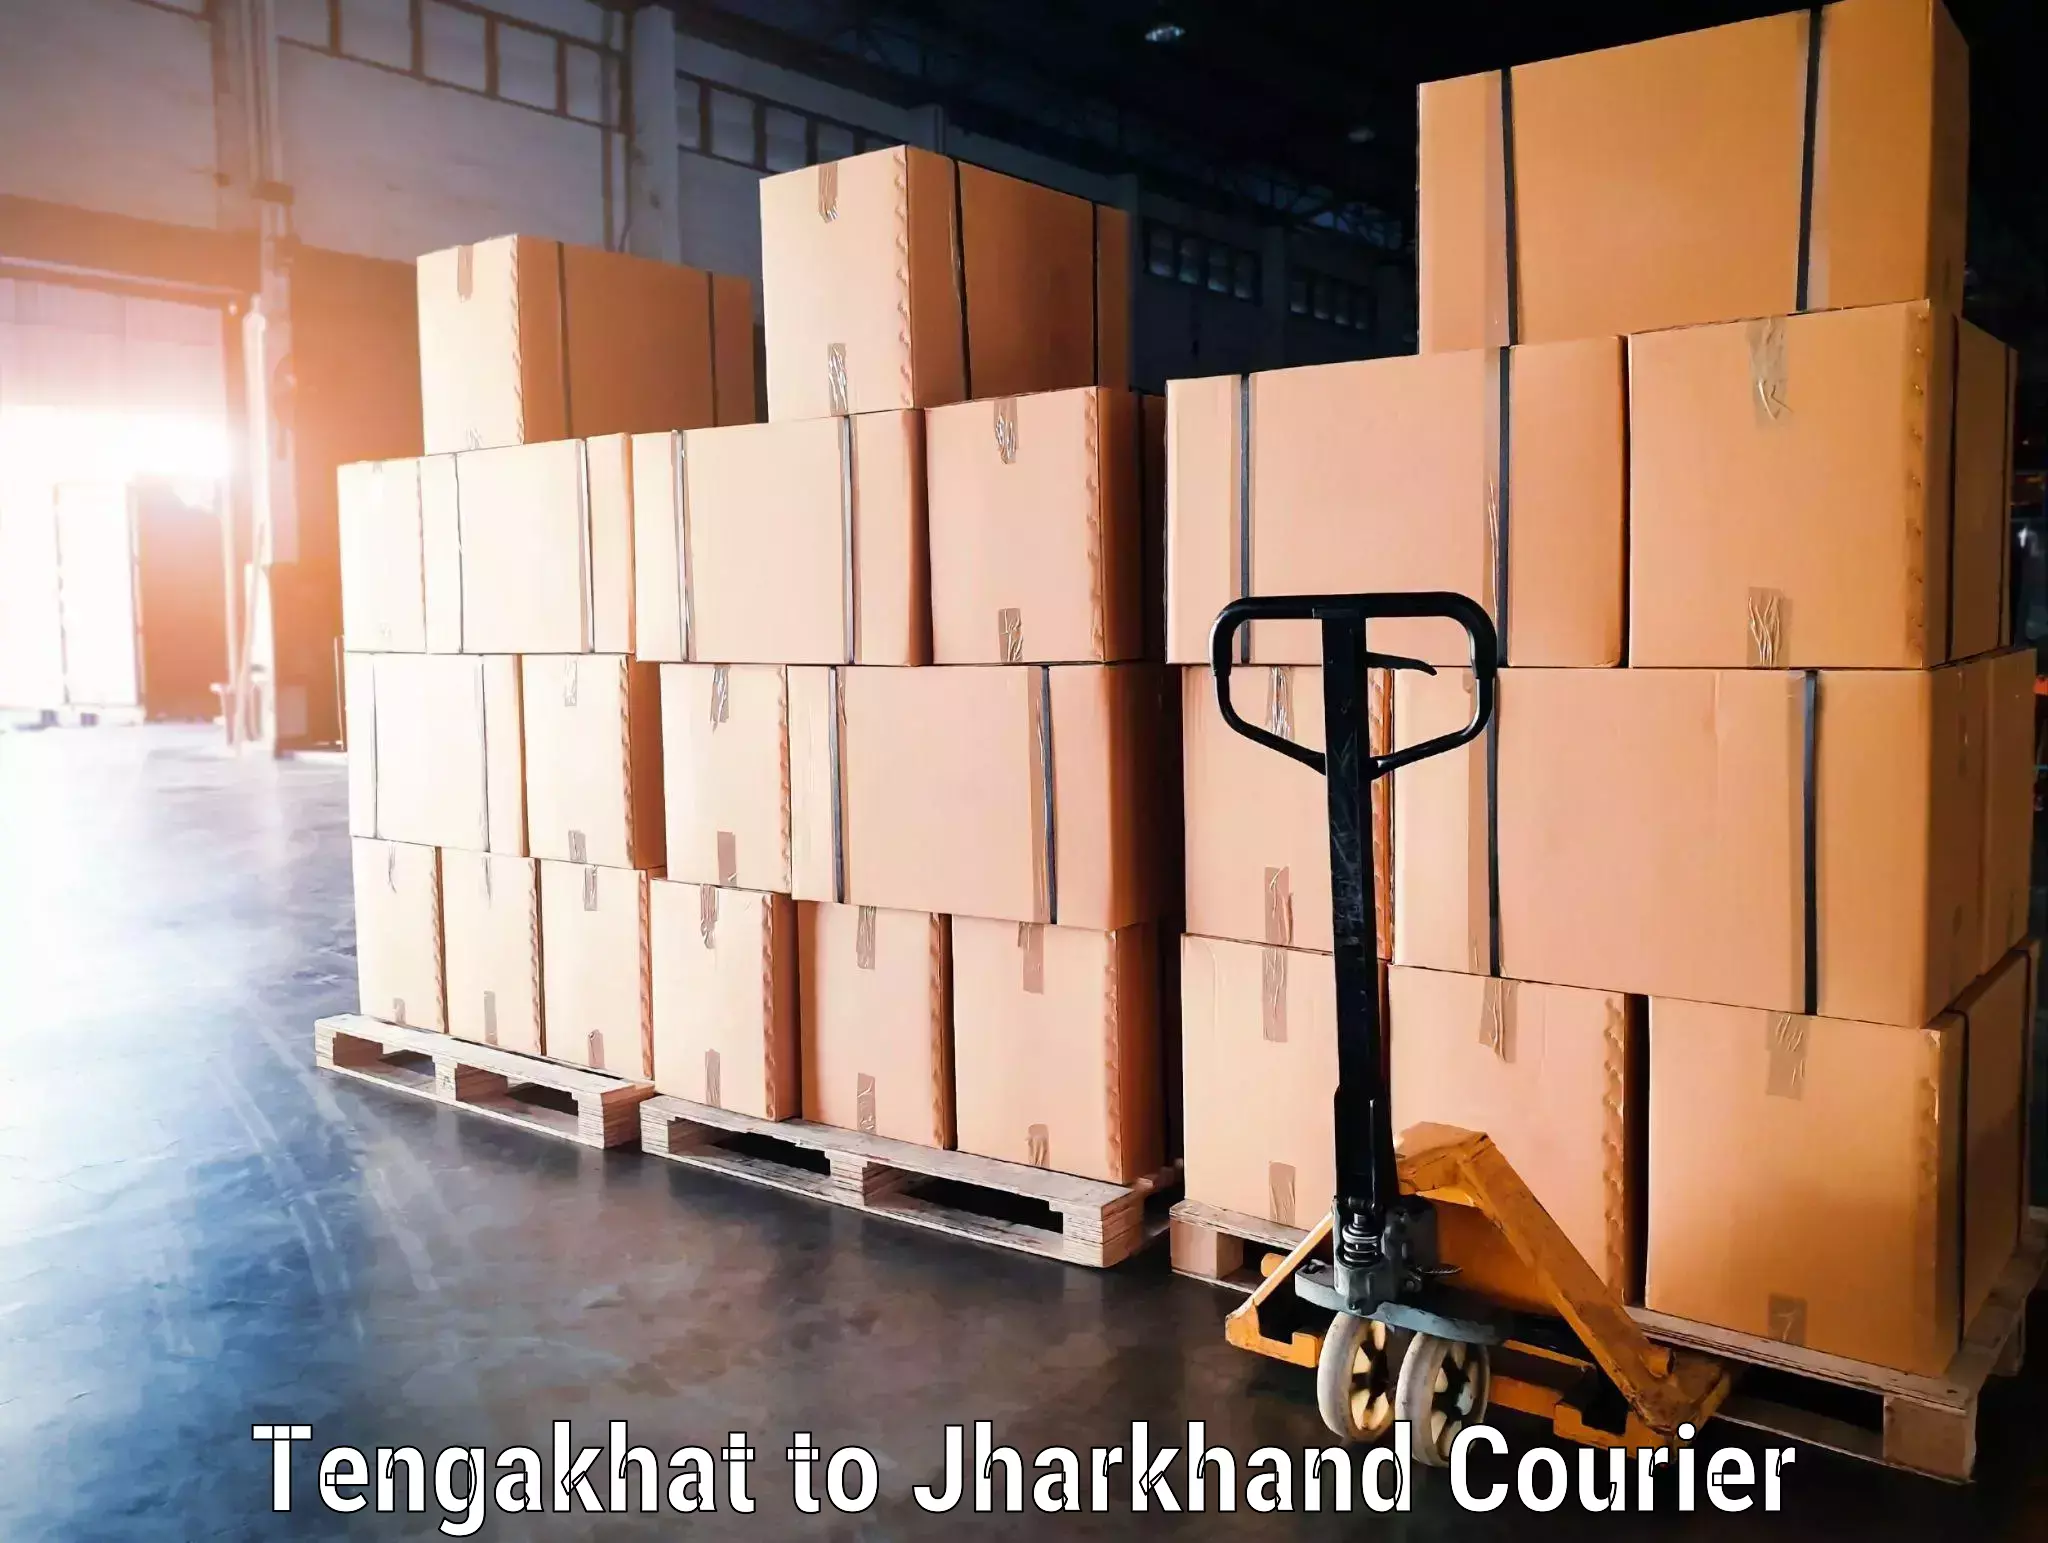 Luggage shipment specialists Tengakhat to Chouparan